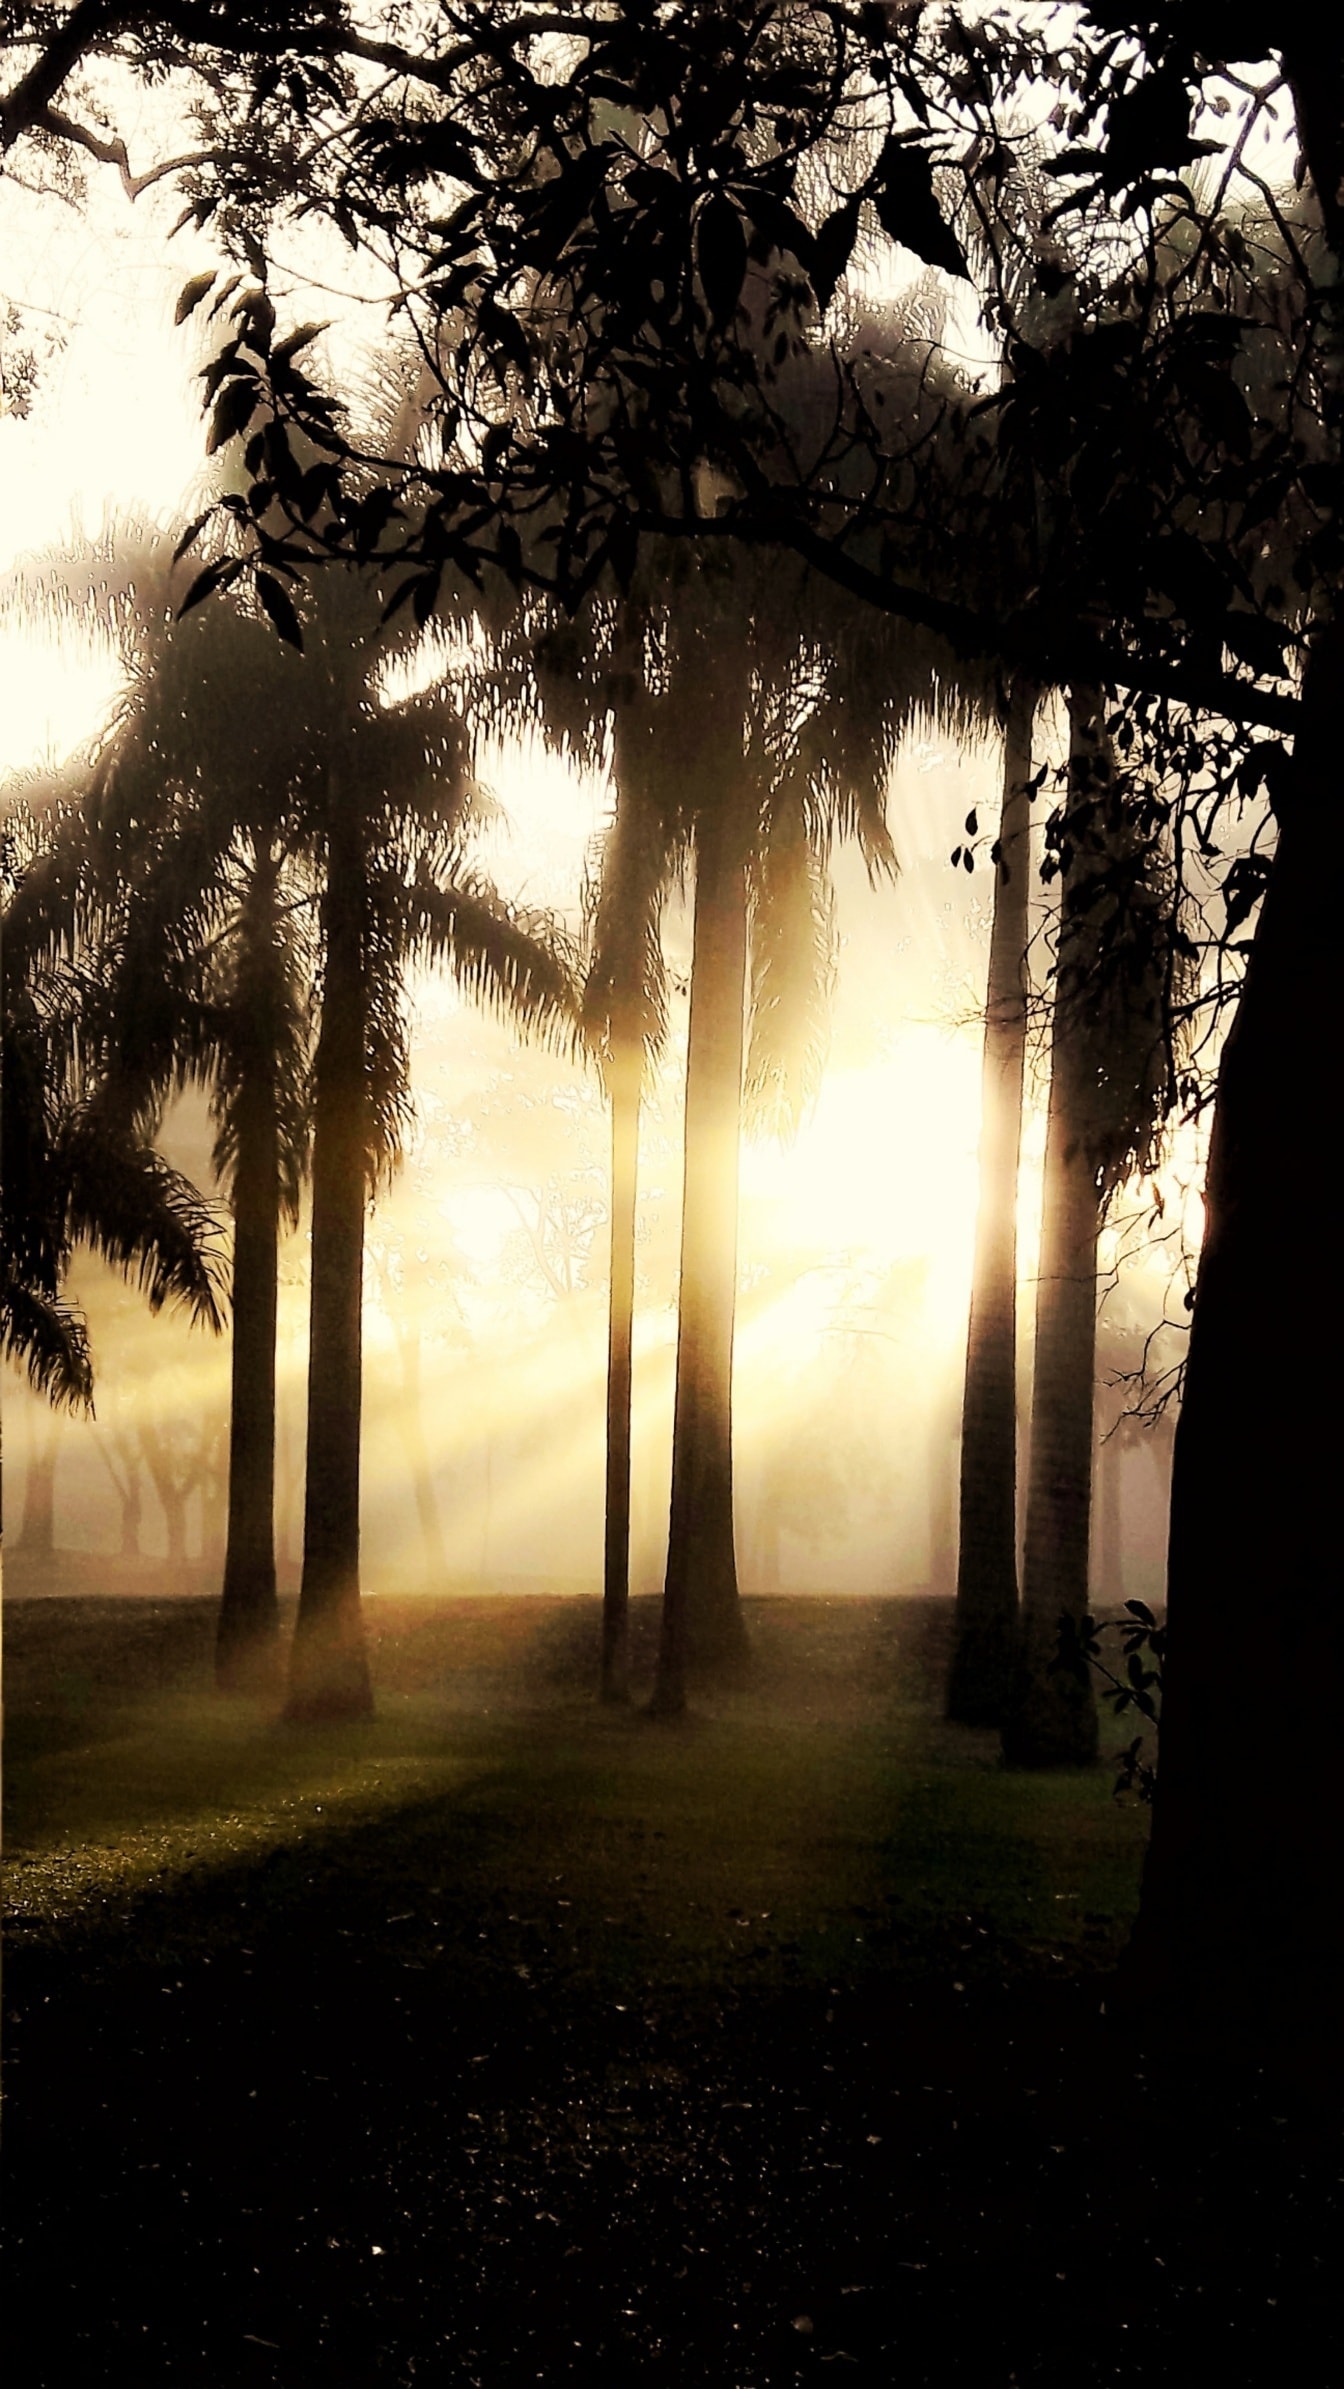 Graphic in sepia style of sunlight in dark forest with silhouette of trees